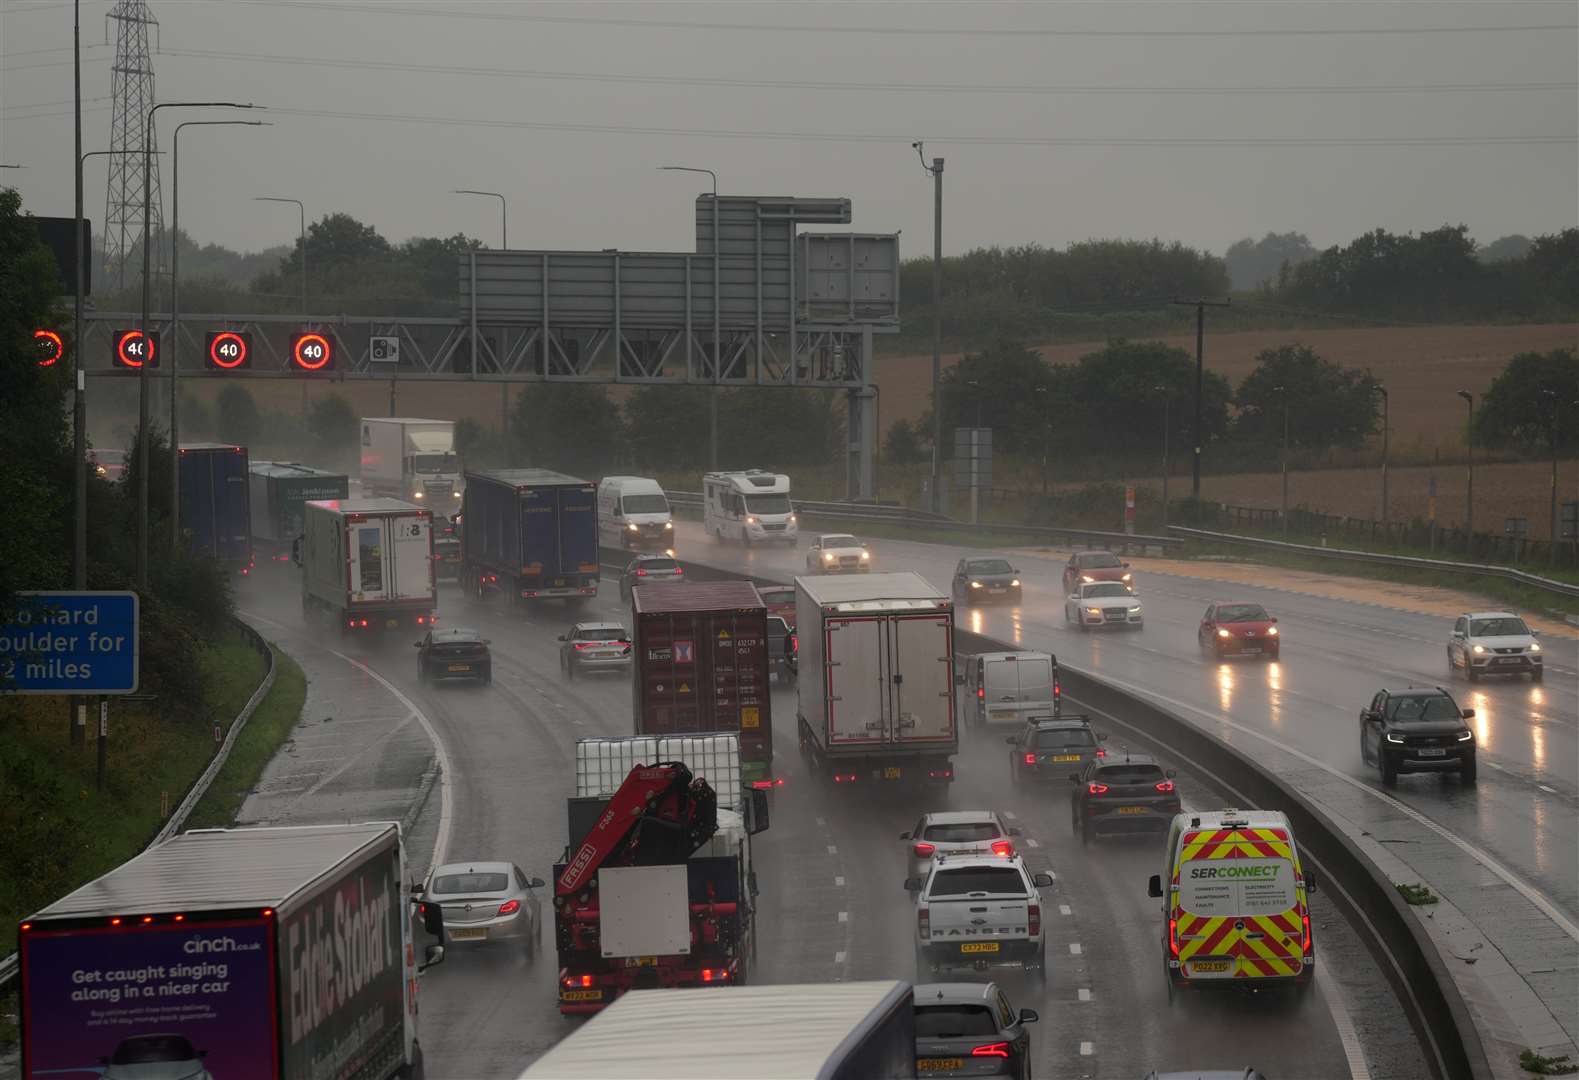 Slow traffic in heavy rain on the M62 near Brighouse in West Yorkshire (Danny Lawson/PA)